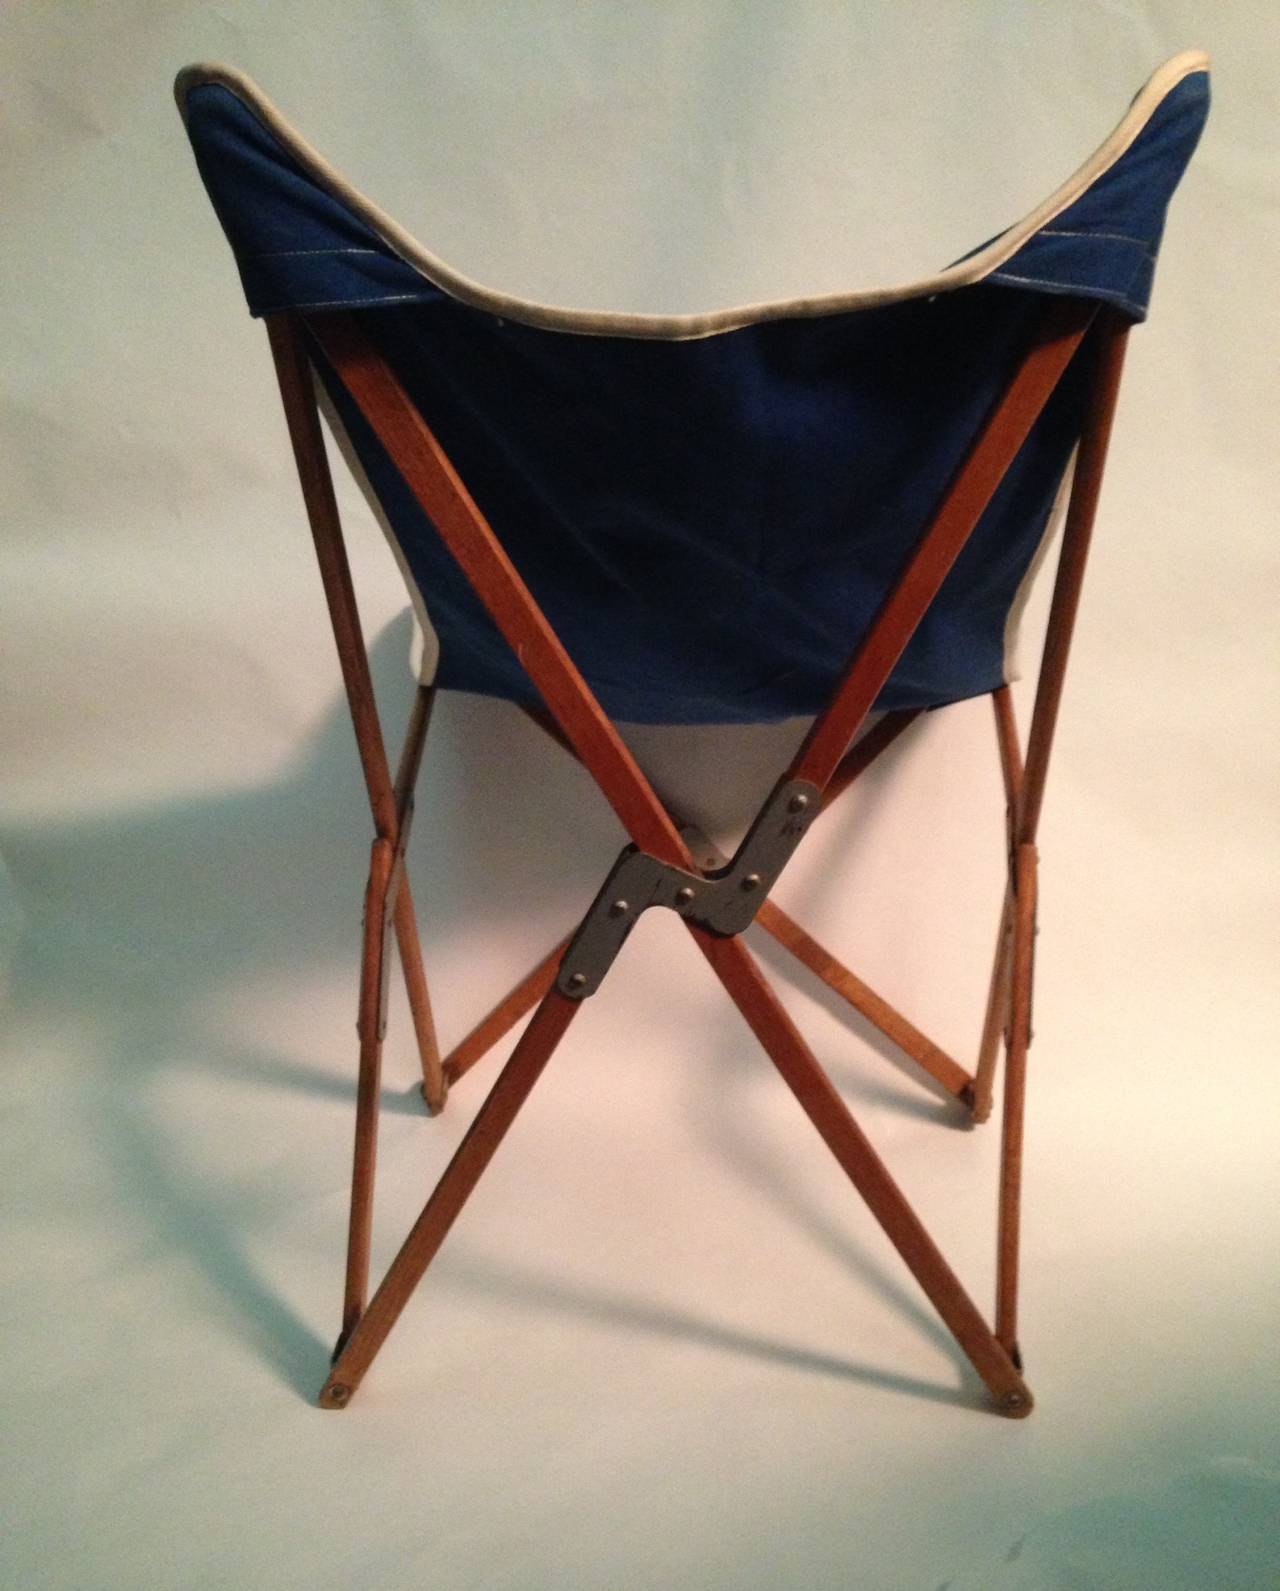 Early wood folding chair (Adolescent Size) with canvas seat. Designed by Mogens Lassen. Sturdy hinged wood frame with Marine Blue canvas (piped in white) seat. Possibly a prototype size.